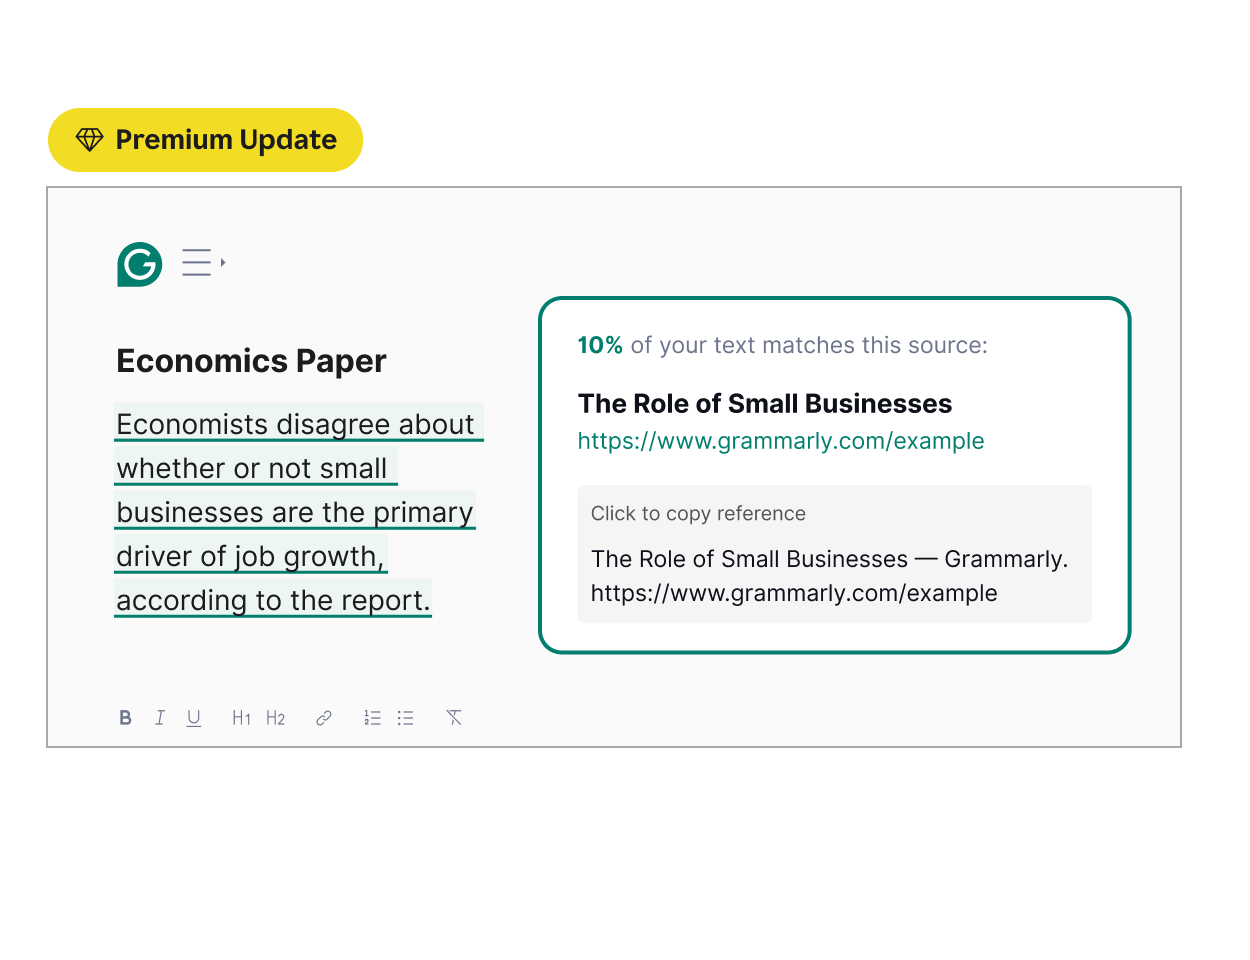 Grammarly shows 10% of your text matching an existing source. 